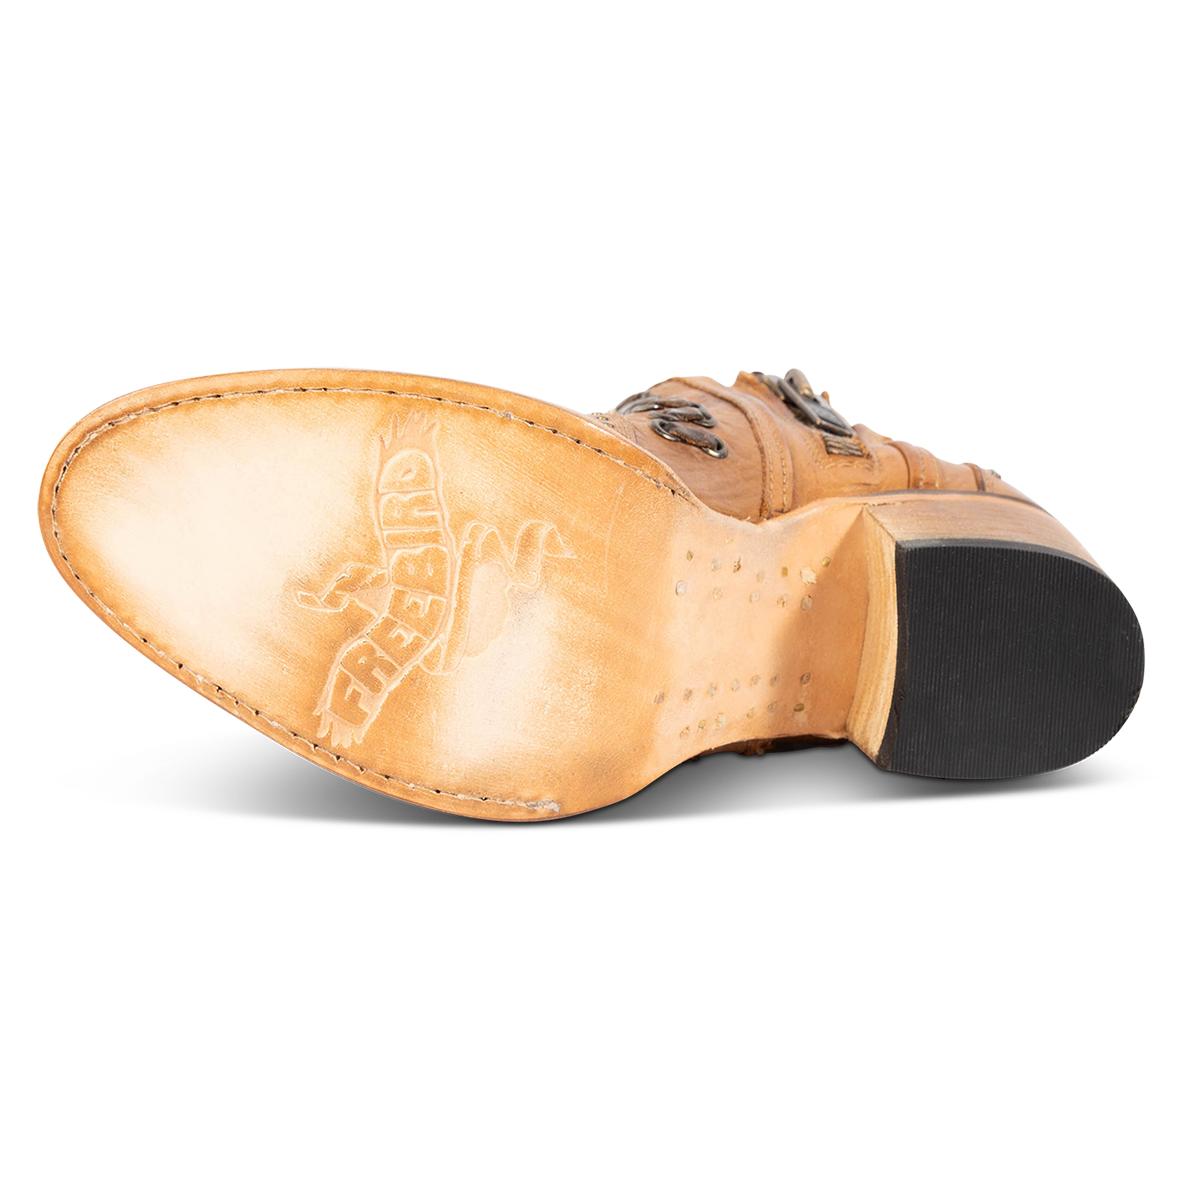 Leather sole imprinted with FREEBIRD on women's Ryder wheat leather bootie